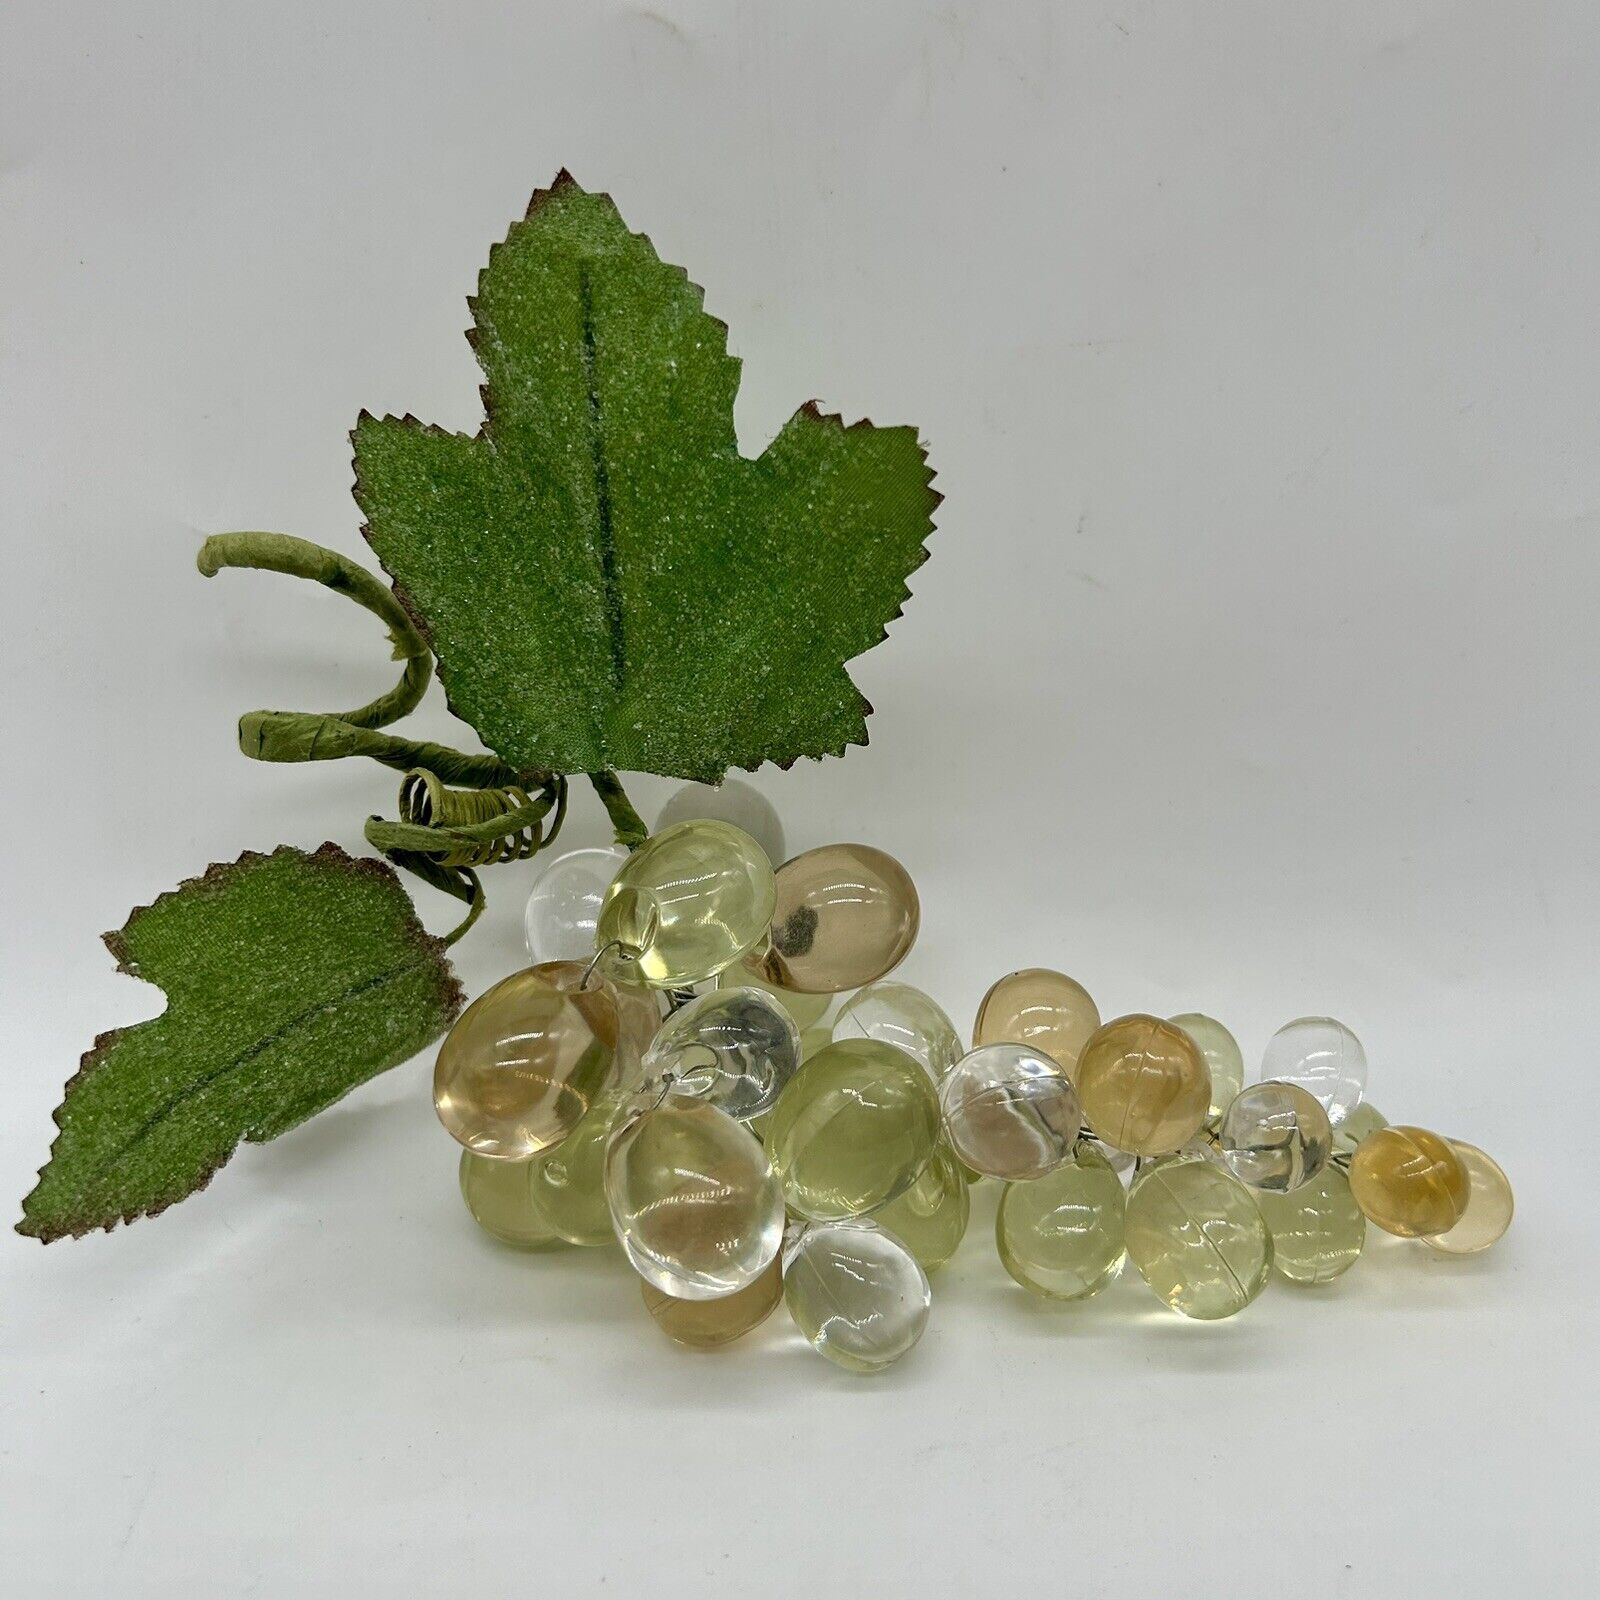 Vintage MCM 1960’s Light Green/Amber Lucite Grapes Bunch 5.5”L